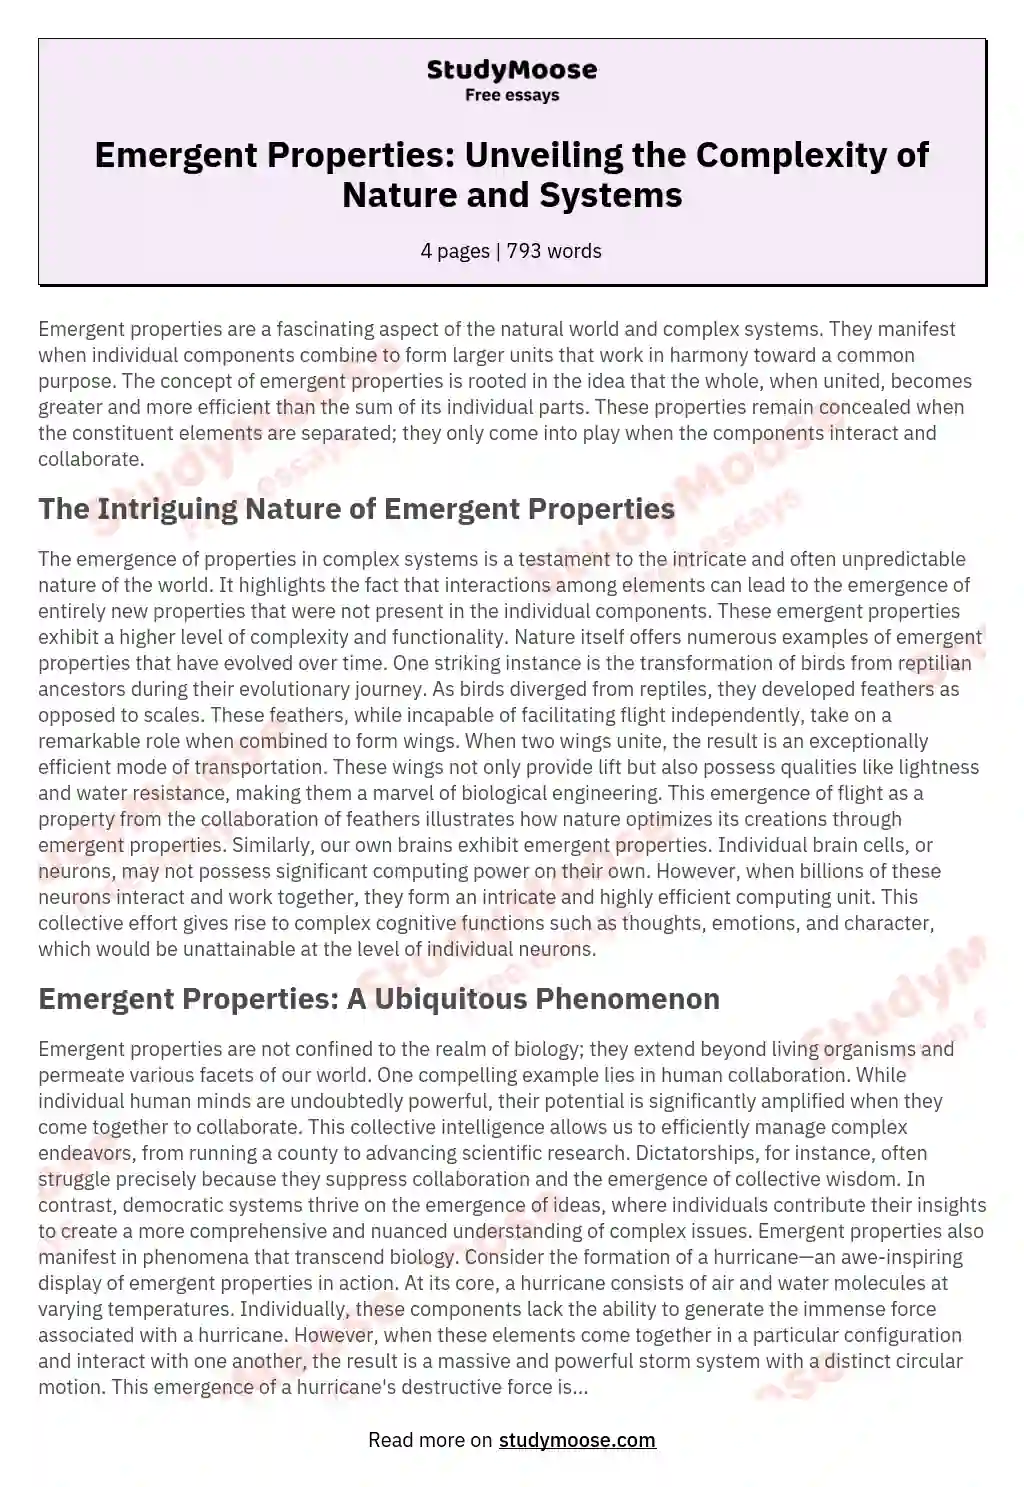 Emergent Properties: Unveiling the Complexity of Nature and Systems essay